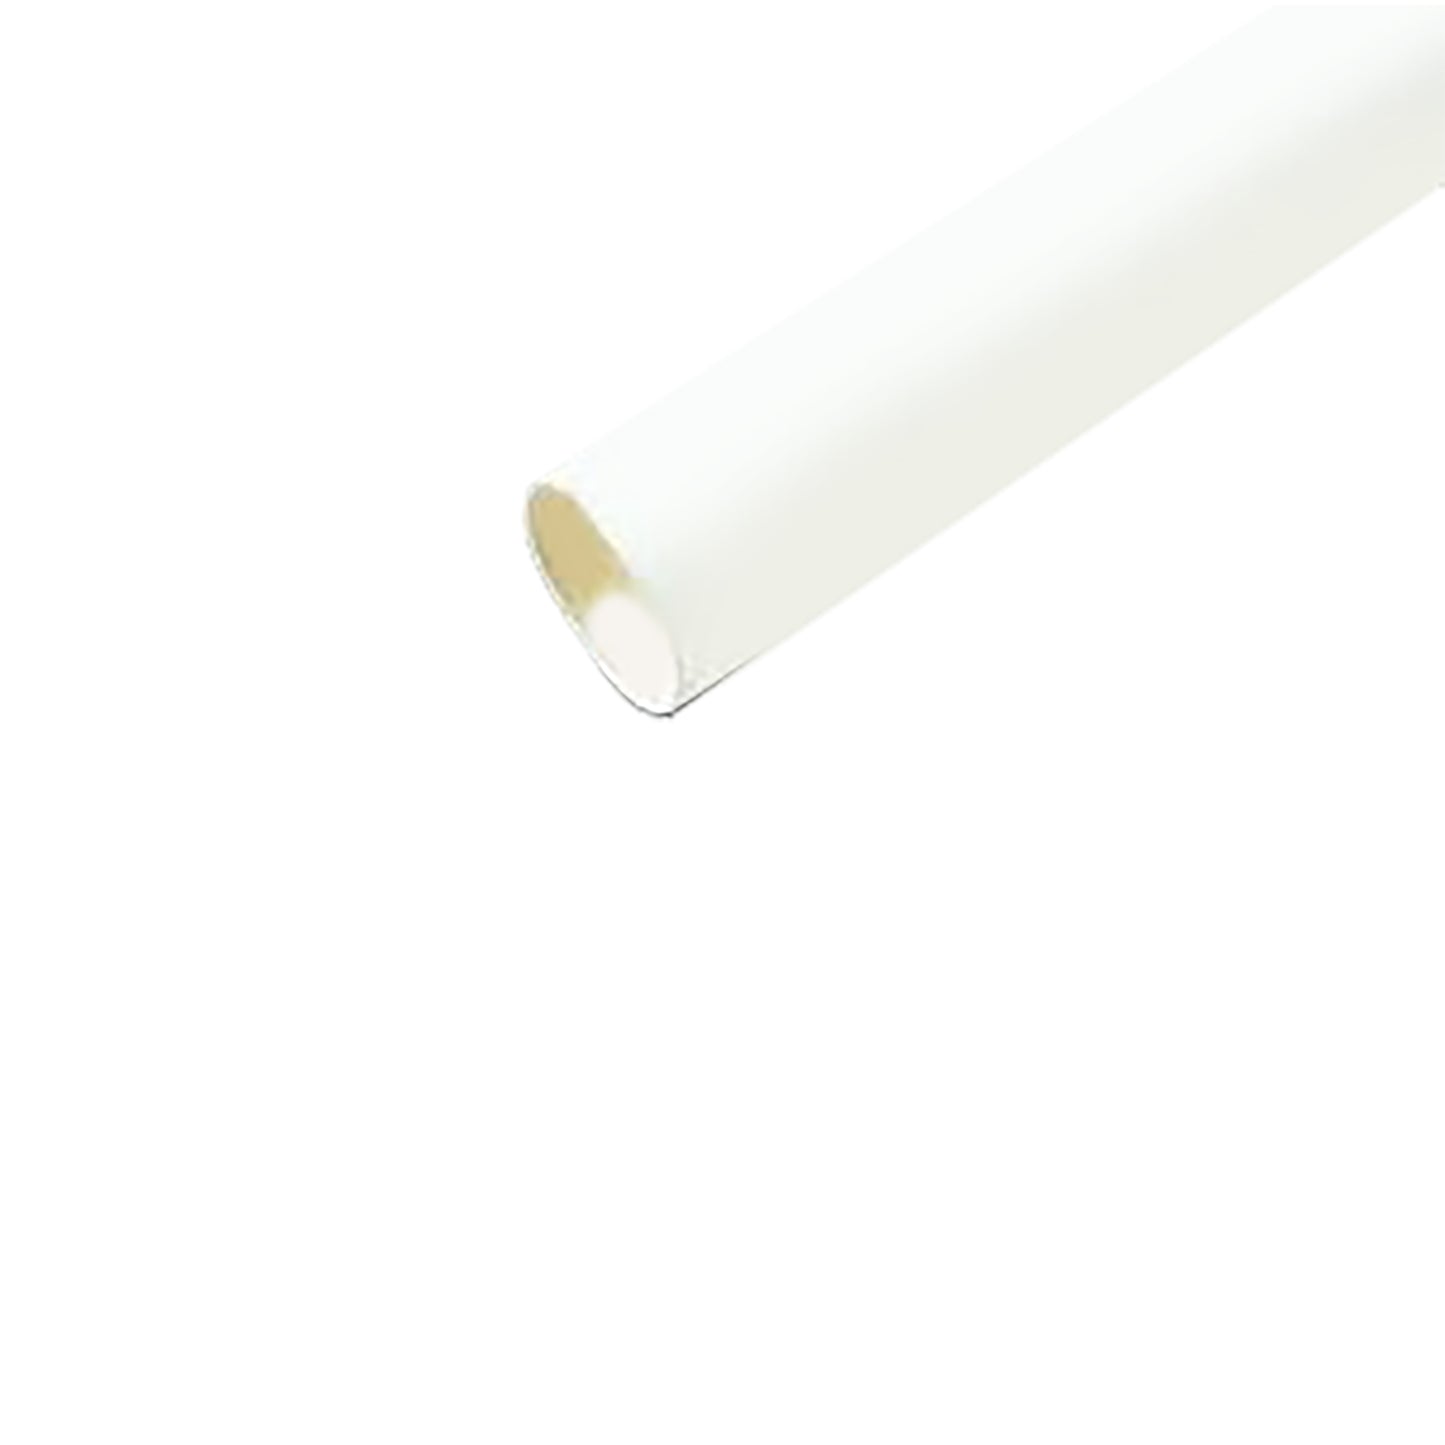 Flexible Thin Single Wall Non-Adhesive Heat Shrink Tubing 2:1 White 1/4" ID - 48" Inch 4 Pack